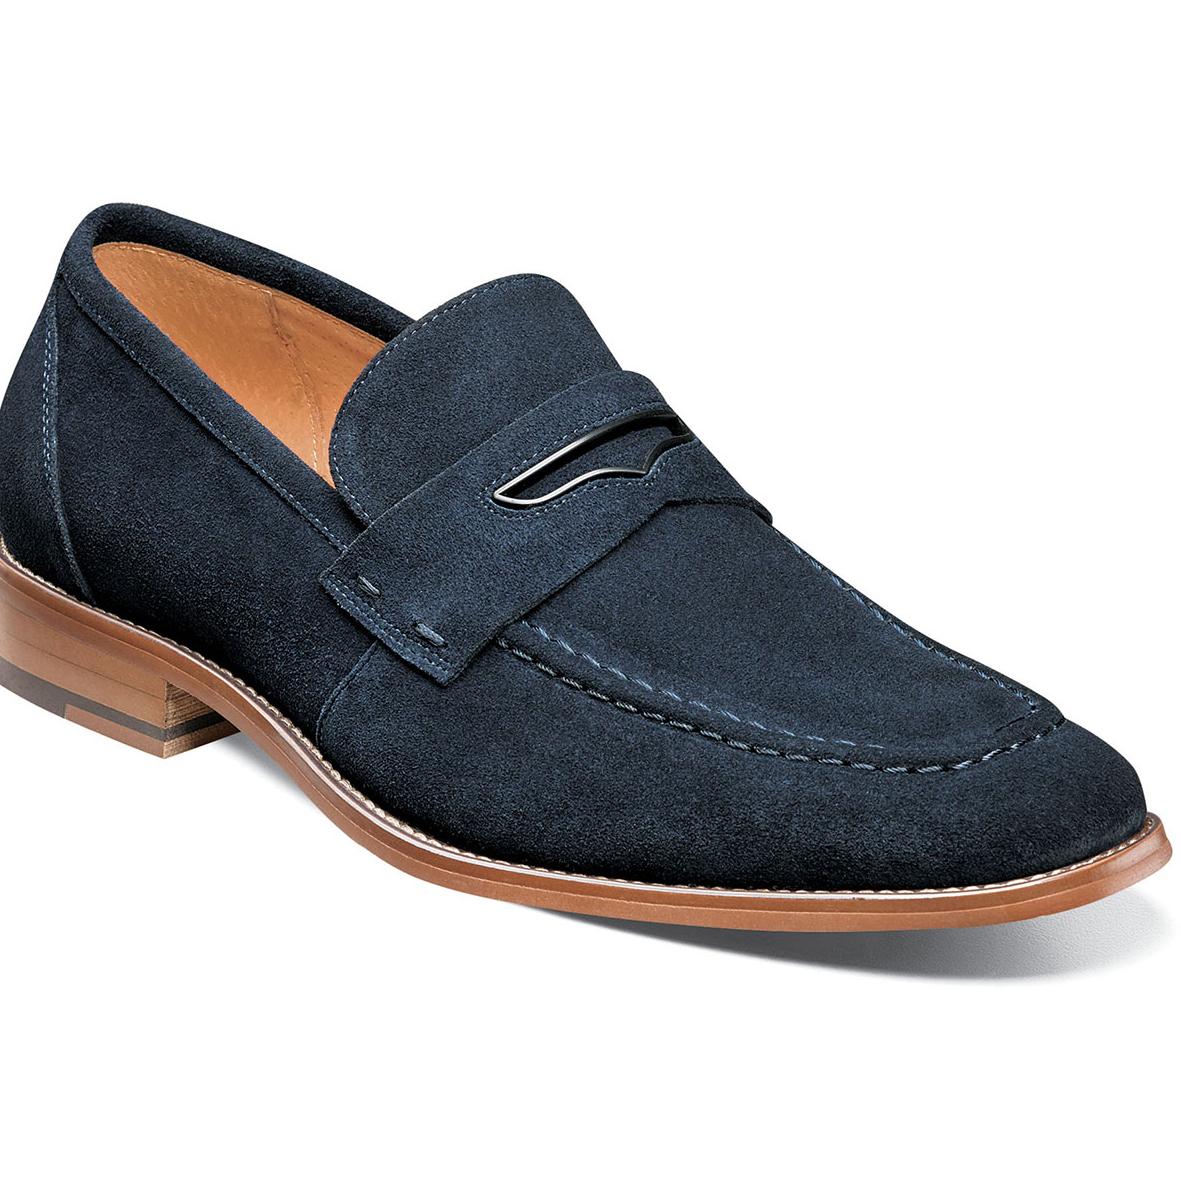 Stacy Adams Colfax Navy Genuine Suede Leather Moc Toe Penny Slip On